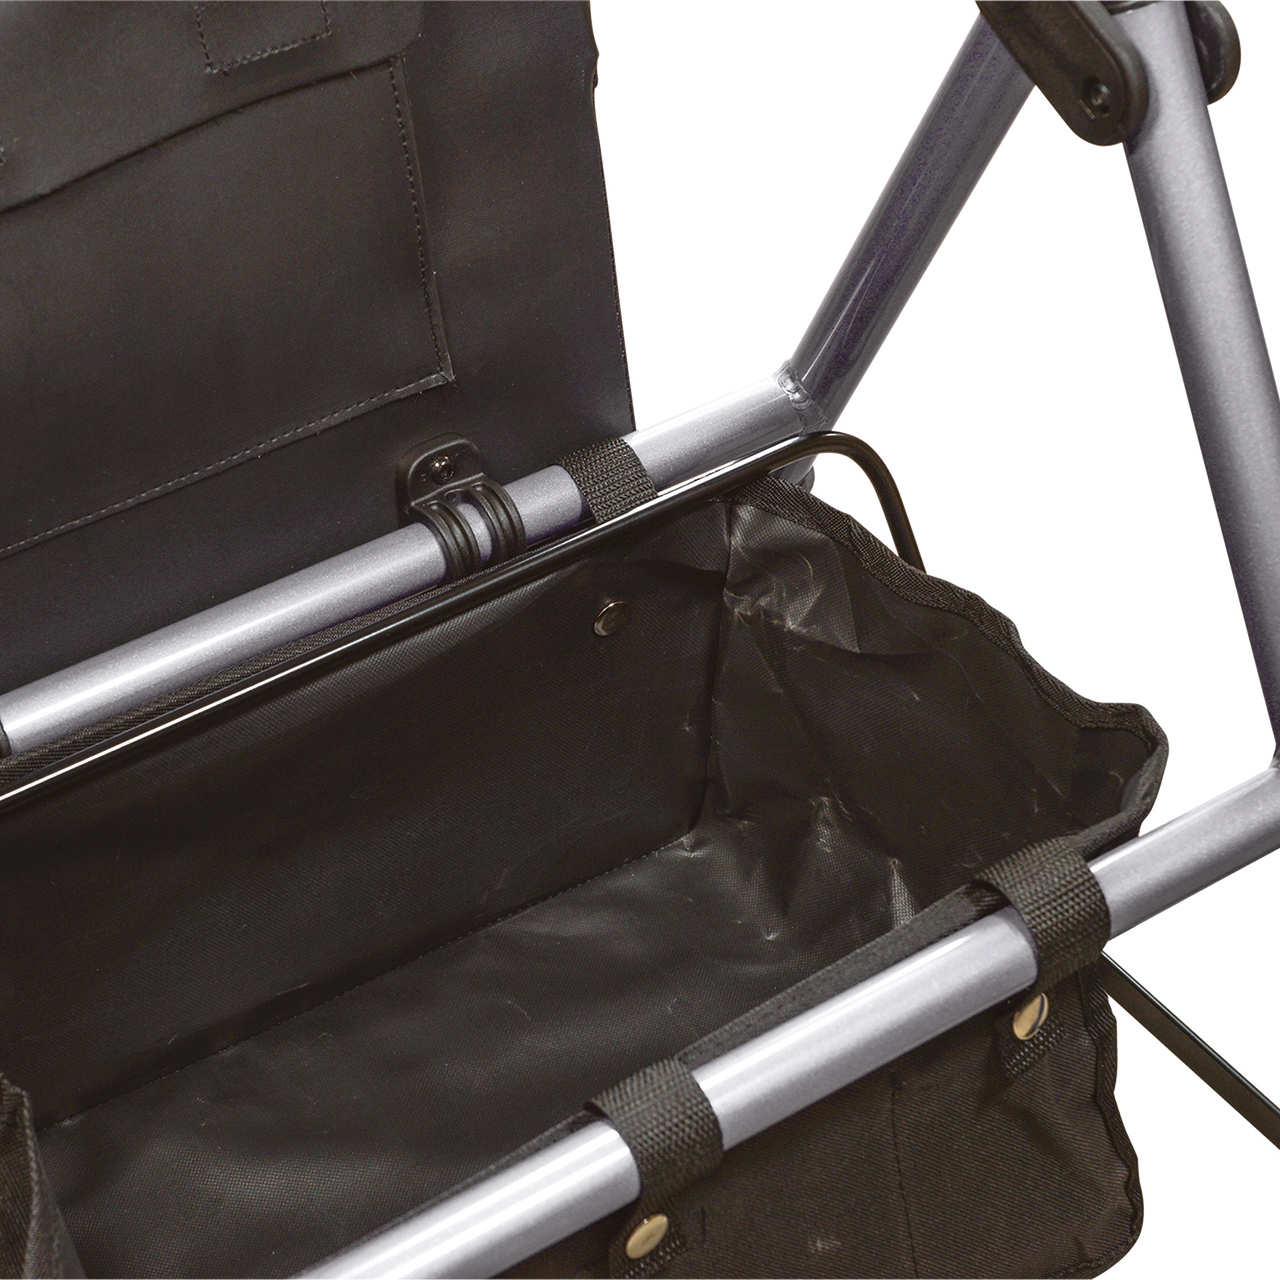 Four-Wheeled Rollator with Bag